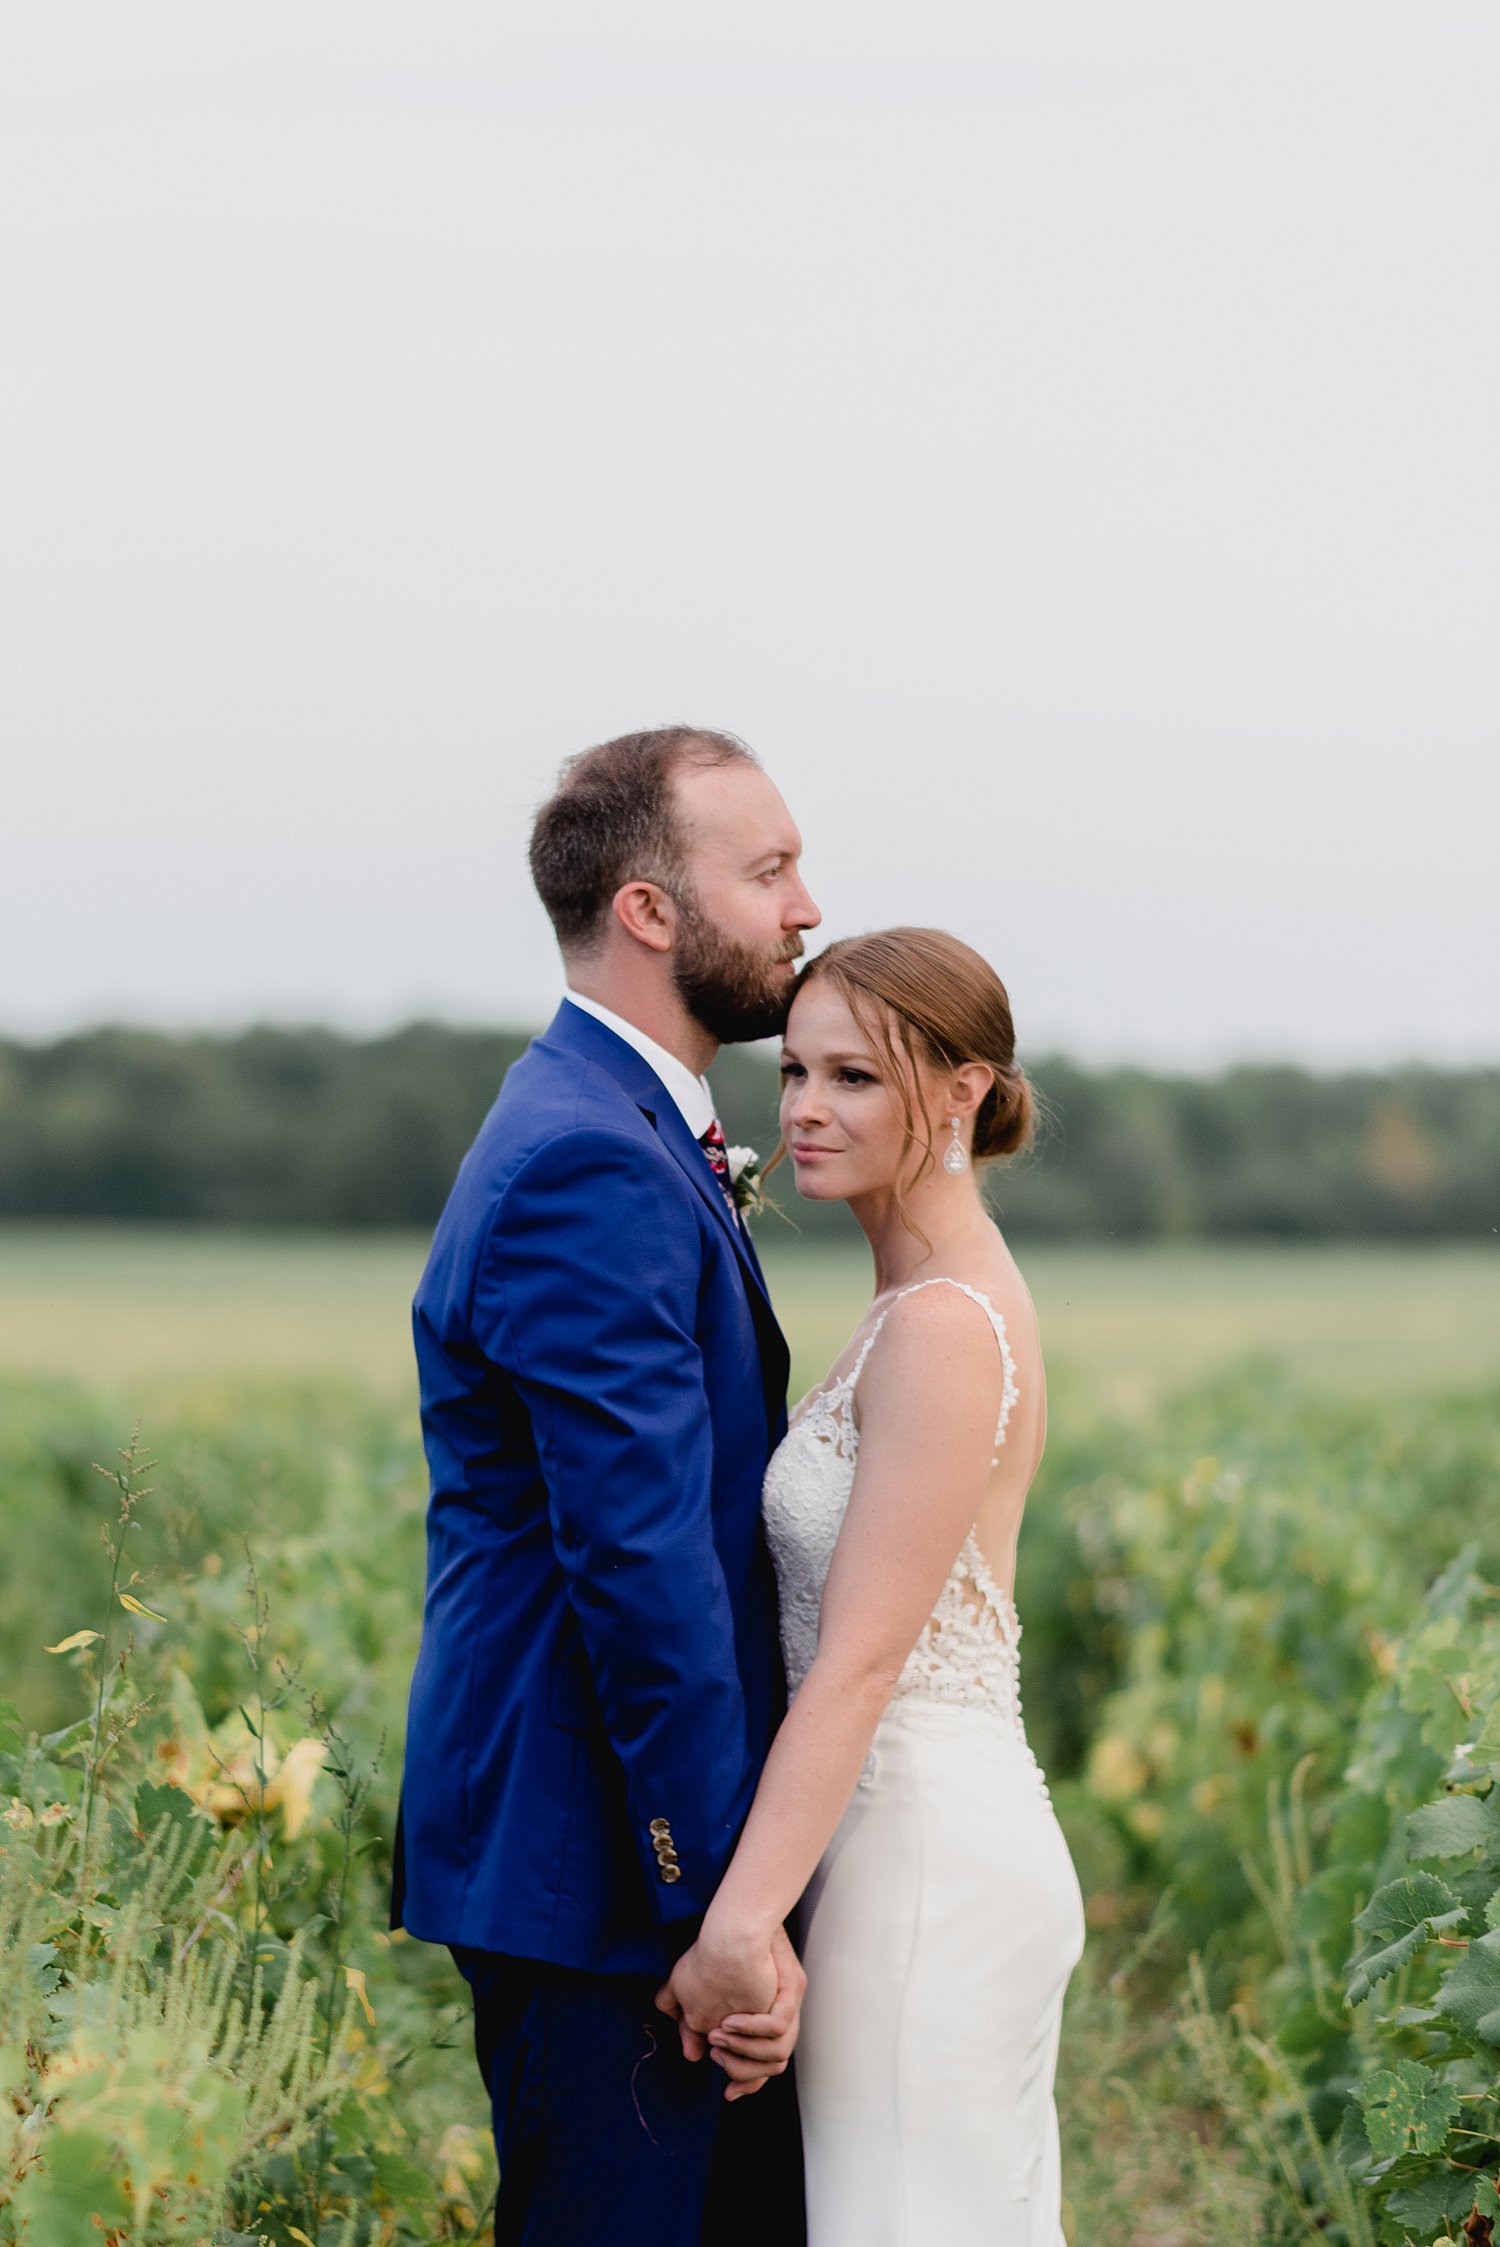 Large Wedding at The Old Third Winery | Prince Edward County Wedding Photographer | Holly McMurter Photographs_0170.jpg